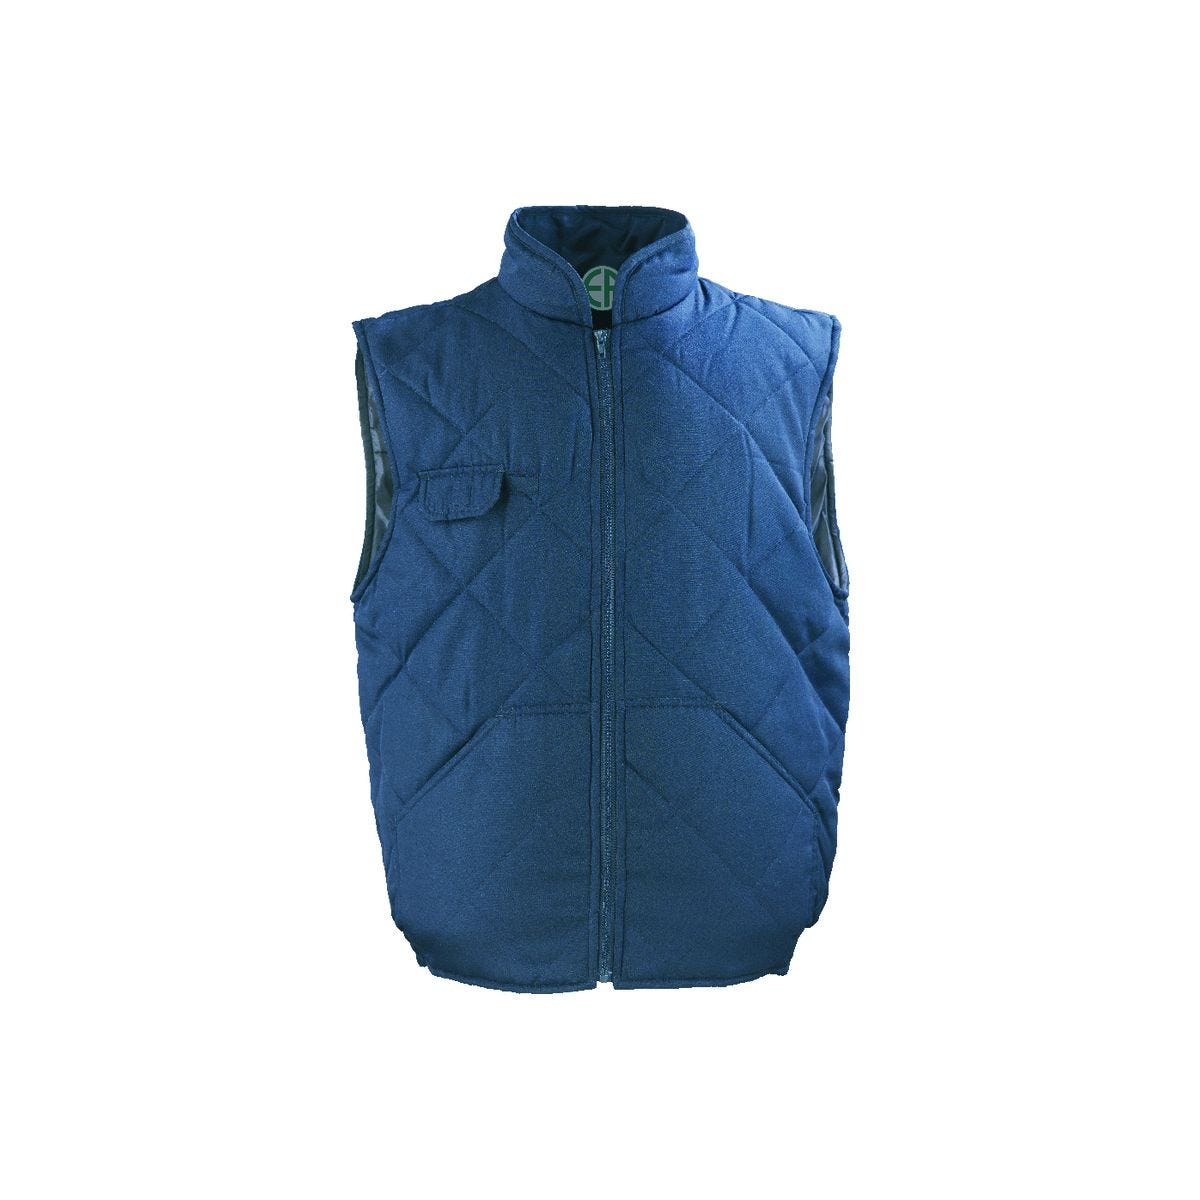 CHOUKA Gilet Froid marine, 65%PES/35%CO + Matelassage 180g/m² - COVERGUARD - Taille 3XL 0